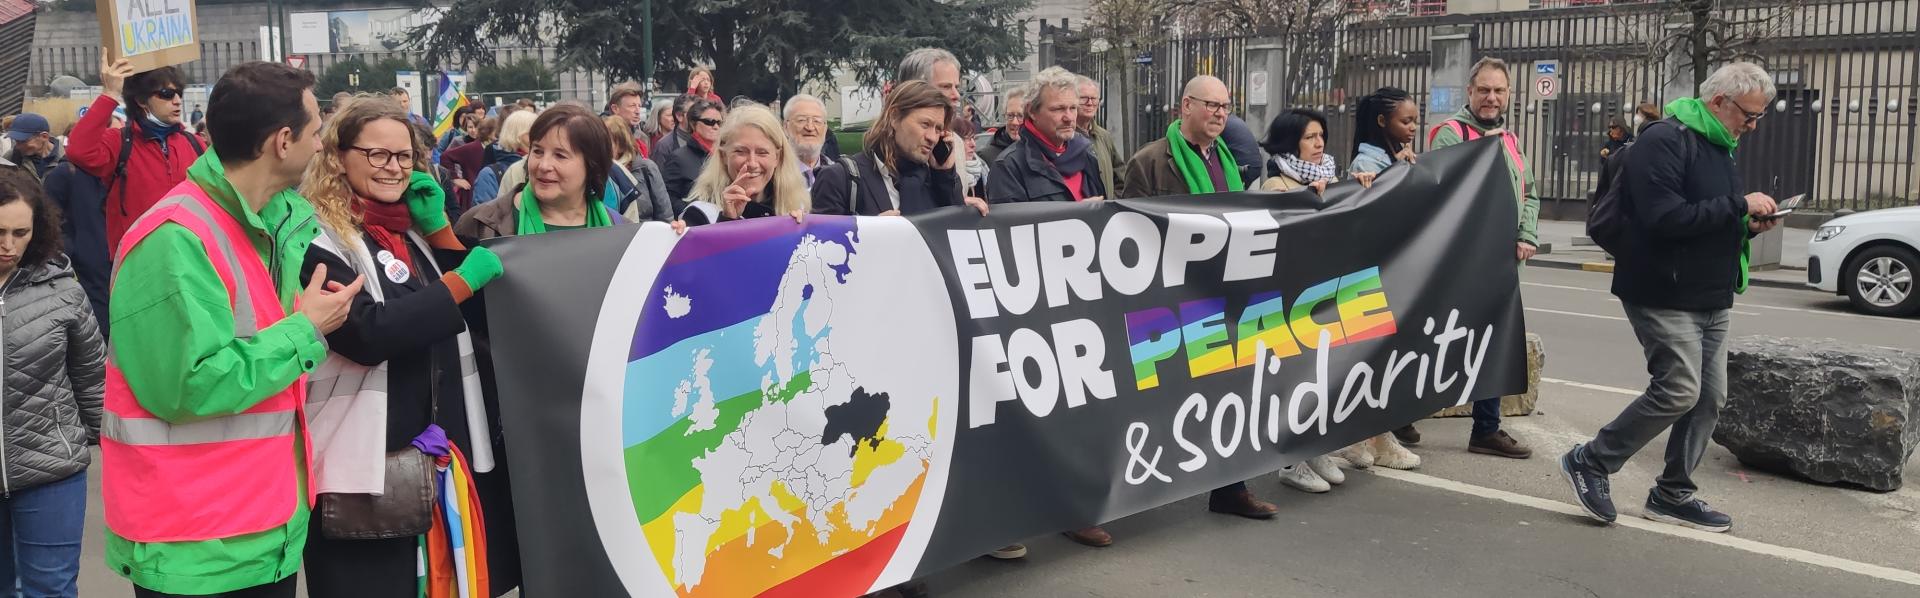 Europe for peace and solidarity-betoging